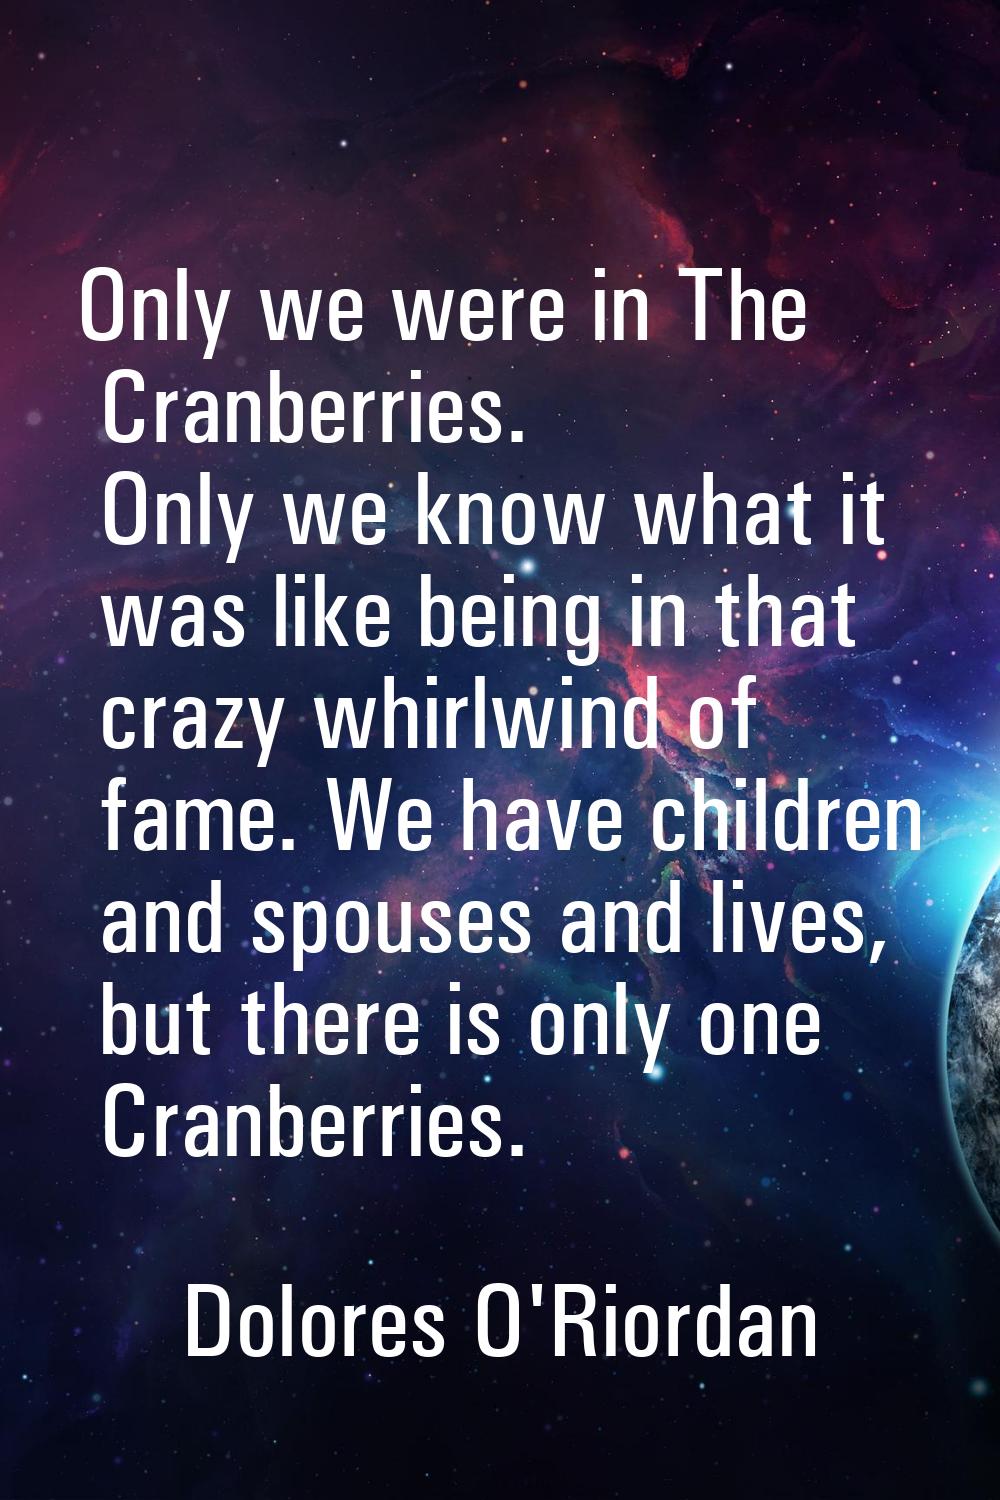 Only we were in The Cranberries. Only we know what it was like being in that crazy whirlwind of fam